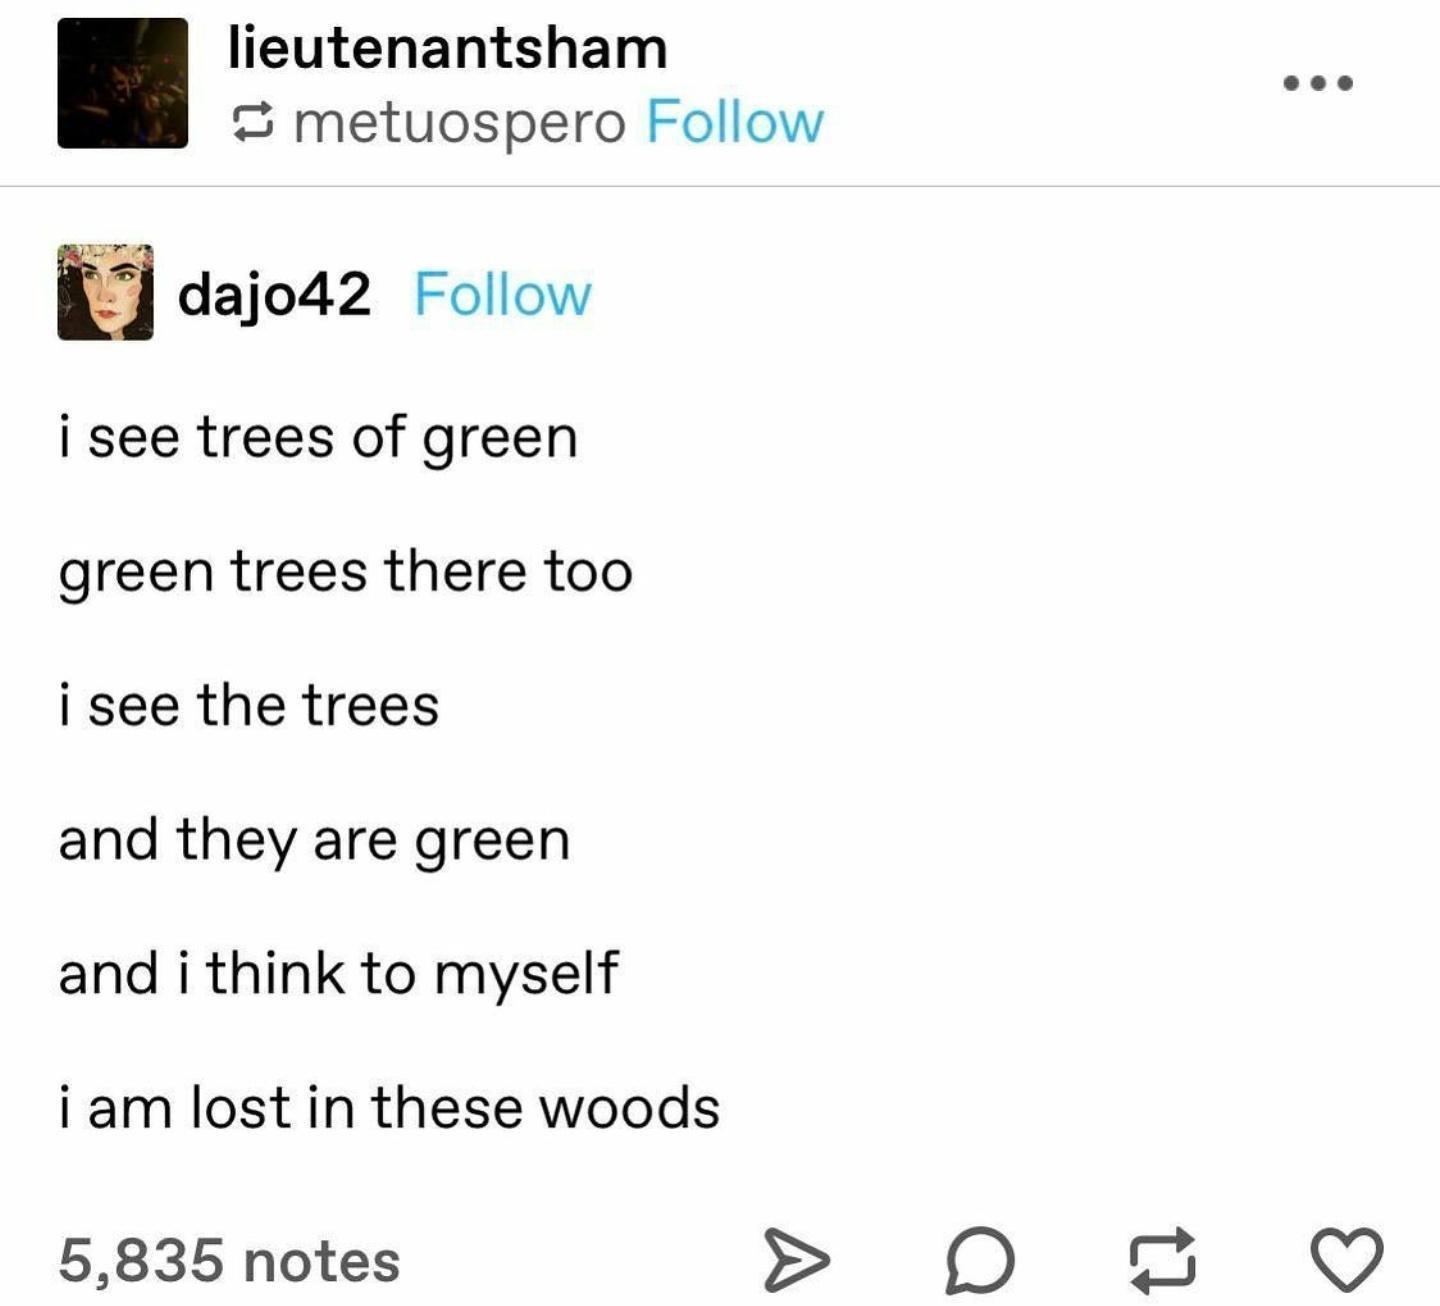 dank memes - funny memes - document - lieutenantsham metuospero dajo42 i see trees of green green trees there too i see the trees and they are green and i think to myself i am lost in these woods 5,835 notes o > t7 Q